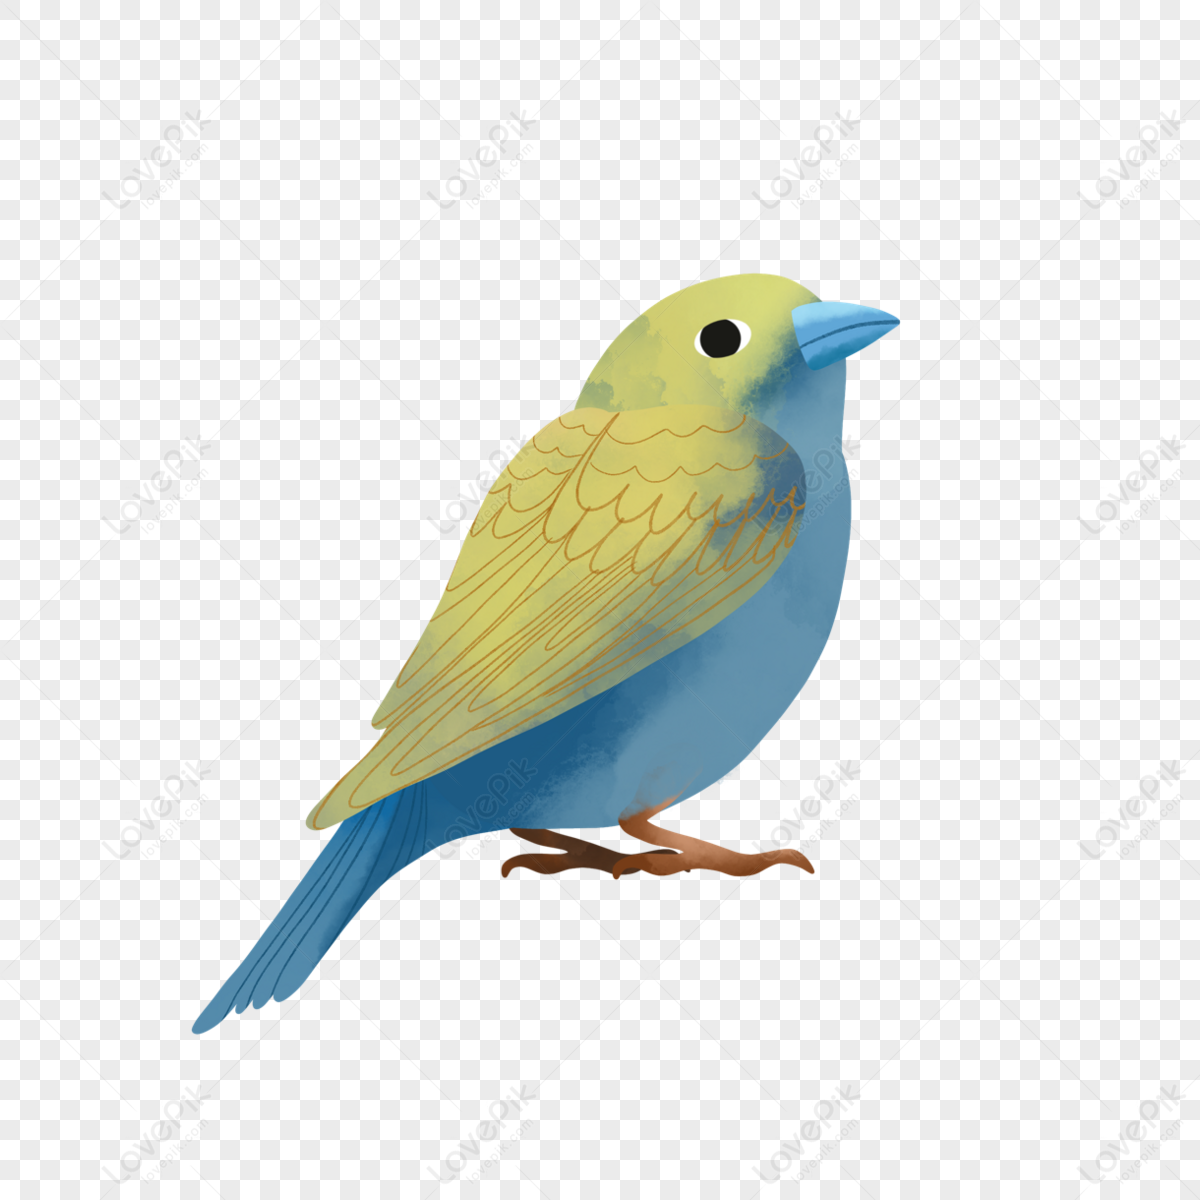 Yellow wings watercolor bird animals,blue,watercolor birds,tree branch png transparent background